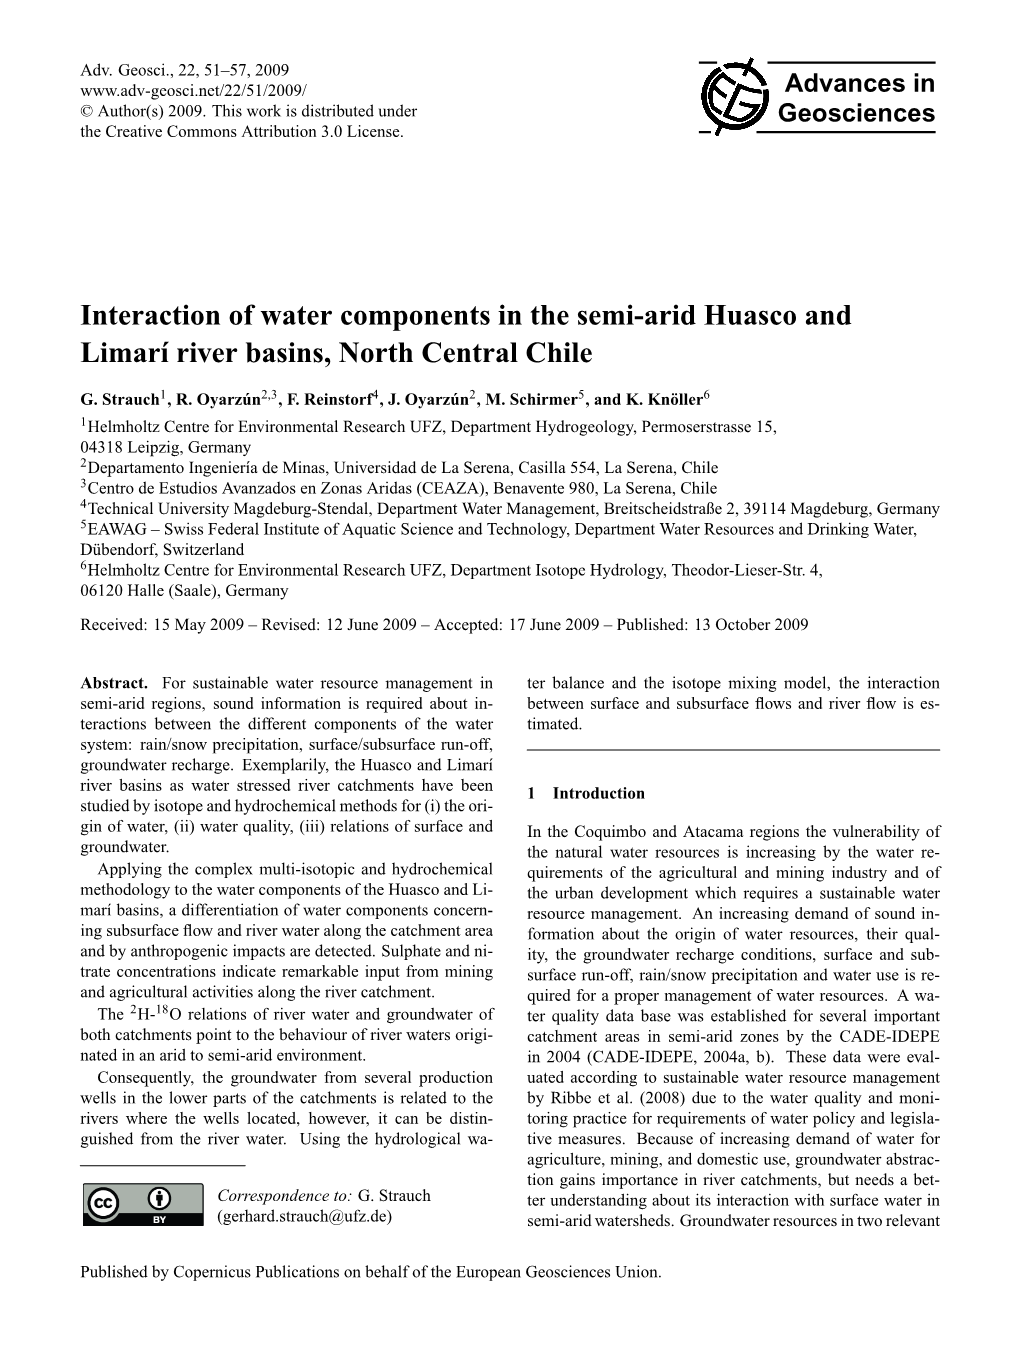 Interaction of Water Components in the Semi-Arid Huasco and Limarı River